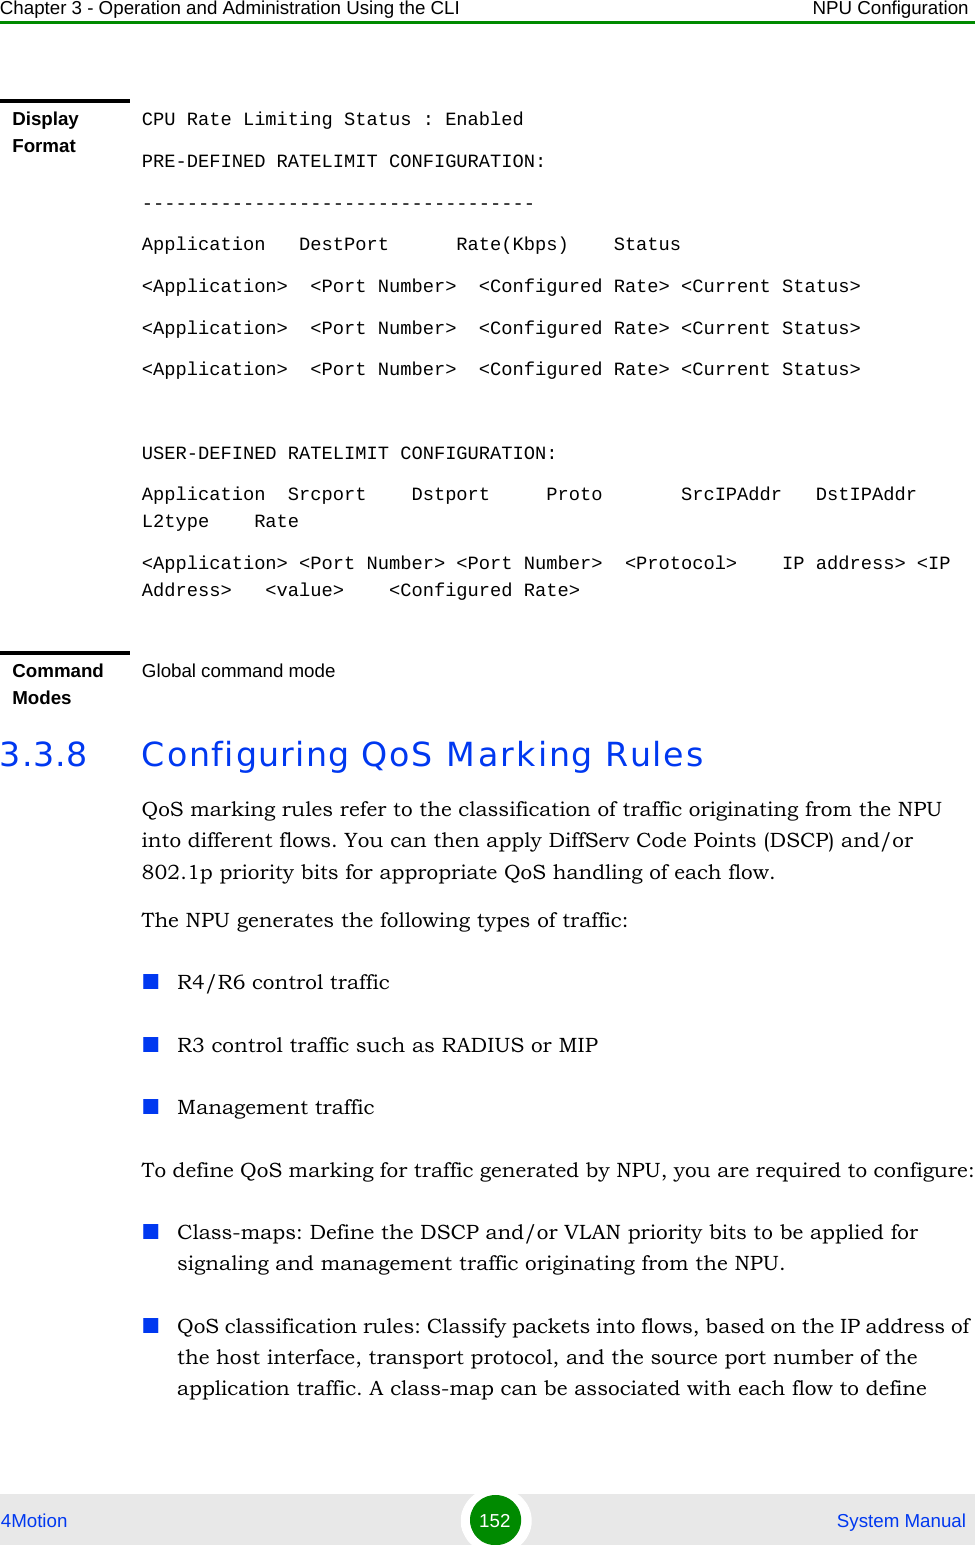 Chapter 3 - Operation and Administration Using the CLI NPU Configuration4Motion 152  System Manual3.3.8 Configuring QoS Marking RulesQoS marking rules refer to the classification of traffic originating from the NPU into different flows. You can then apply DiffServ Code Points (DSCP) and/or 802.1p priority bits for appropriate QoS handling of each flow. The NPU generates the following types of traffic:R4/R6 control trafficR3 control traffic such as RADIUS or MIPManagement traffic To define QoS marking for traffic generated by NPU, you are required to configure:Class-maps: Define the DSCP and/or VLAN priority bits to be applied for signaling and management traffic originating from the NPU.QoS classification rules: Classify packets into flows, based on the IP address of the host interface, transport protocol, and the source port number of the application traffic. A class-map can be associated with each flow to define Display FormatCPU Rate Limiting Status : EnabledPRE-DEFINED RATELIMIT CONFIGURATION:-----------------------------------Application   DestPort      Rate(Kbps)    Status&lt;Application&gt;  &lt;Port Number&gt;  &lt;Configured Rate&gt; &lt;Current Status&gt; &lt;Application&gt;  &lt;Port Number&gt;  &lt;Configured Rate&gt; &lt;Current Status&gt; &lt;Application&gt;  &lt;Port Number&gt;  &lt;Configured Rate&gt; &lt;Current Status&gt; USER-DEFINED RATELIMIT CONFIGURATION:Application  Srcport    Dstport     Proto       SrcIPAddr   DstIPAddr    L2type    Rate&lt;Application&gt; &lt;Port Number&gt; &lt;Port Number&gt;  &lt;Protocol&gt;    IP address&gt; &lt;IP Address&gt;   &lt;value&gt;    &lt;Configured Rate&gt;Command ModesGlobal command mode